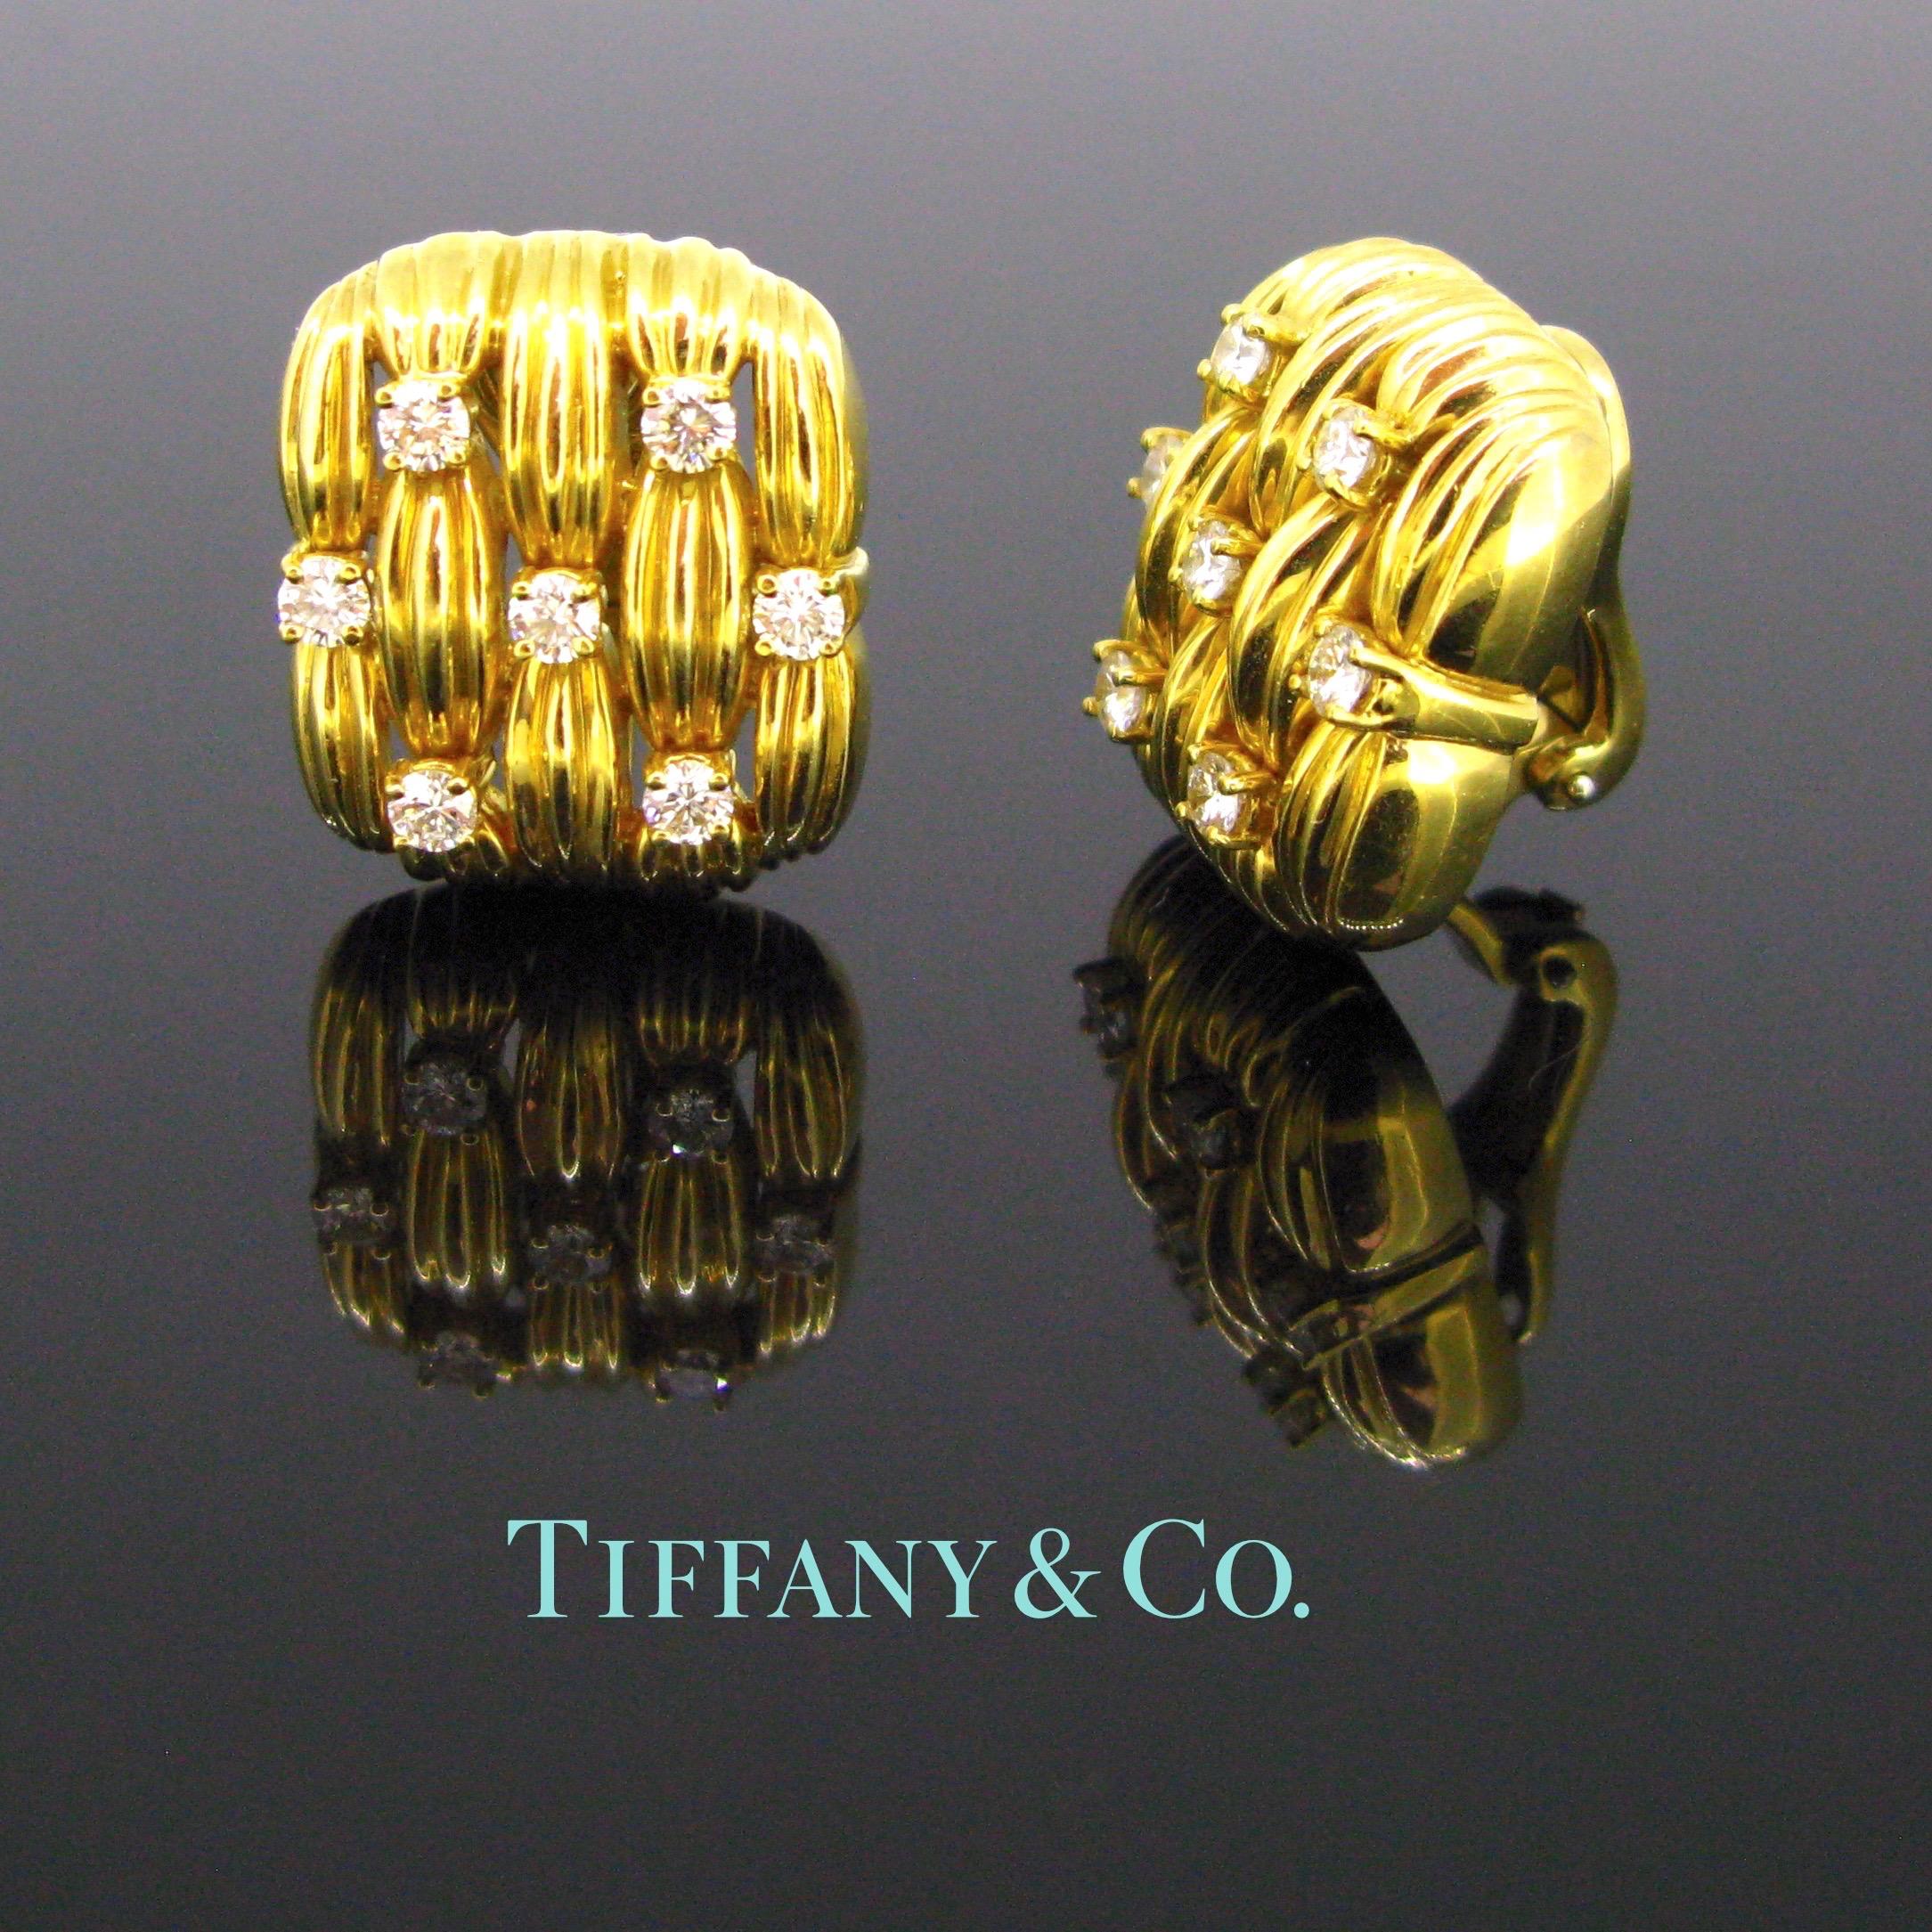 A beautiful pair of clips earrings, made in 18kt yellow gold signed ©1992 Tiffany & Co 750. They belong to the Signature Serie collection, created in 1992. It has a nice basket weave design. The front is adorned with brilliant cut diamonds with a